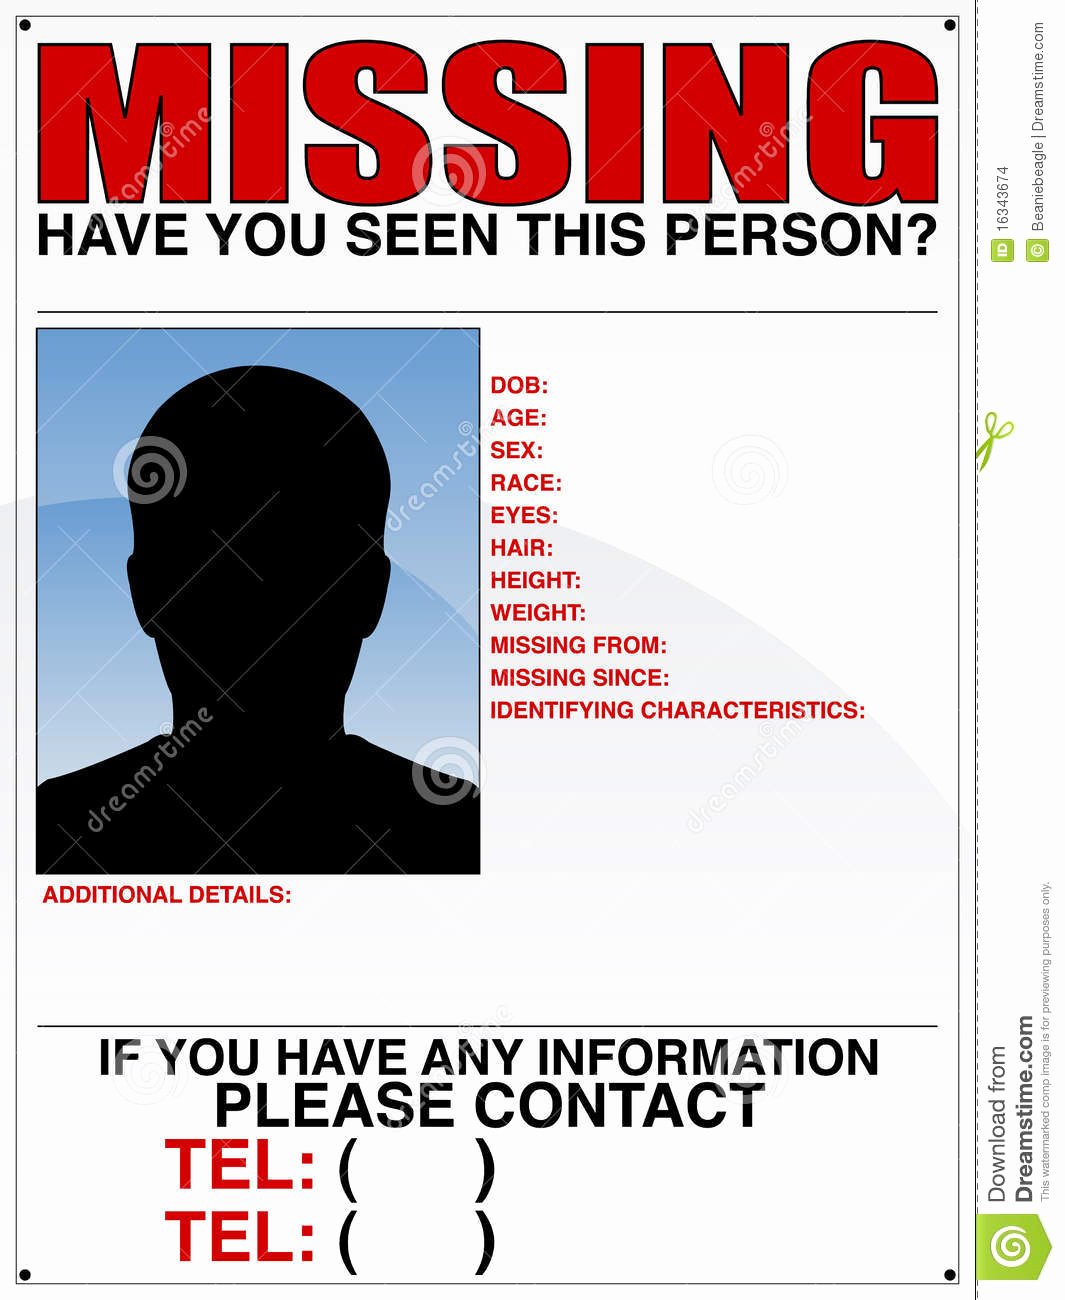 Missing Person Poster Template Fresh Missing Person Poster Stock Image